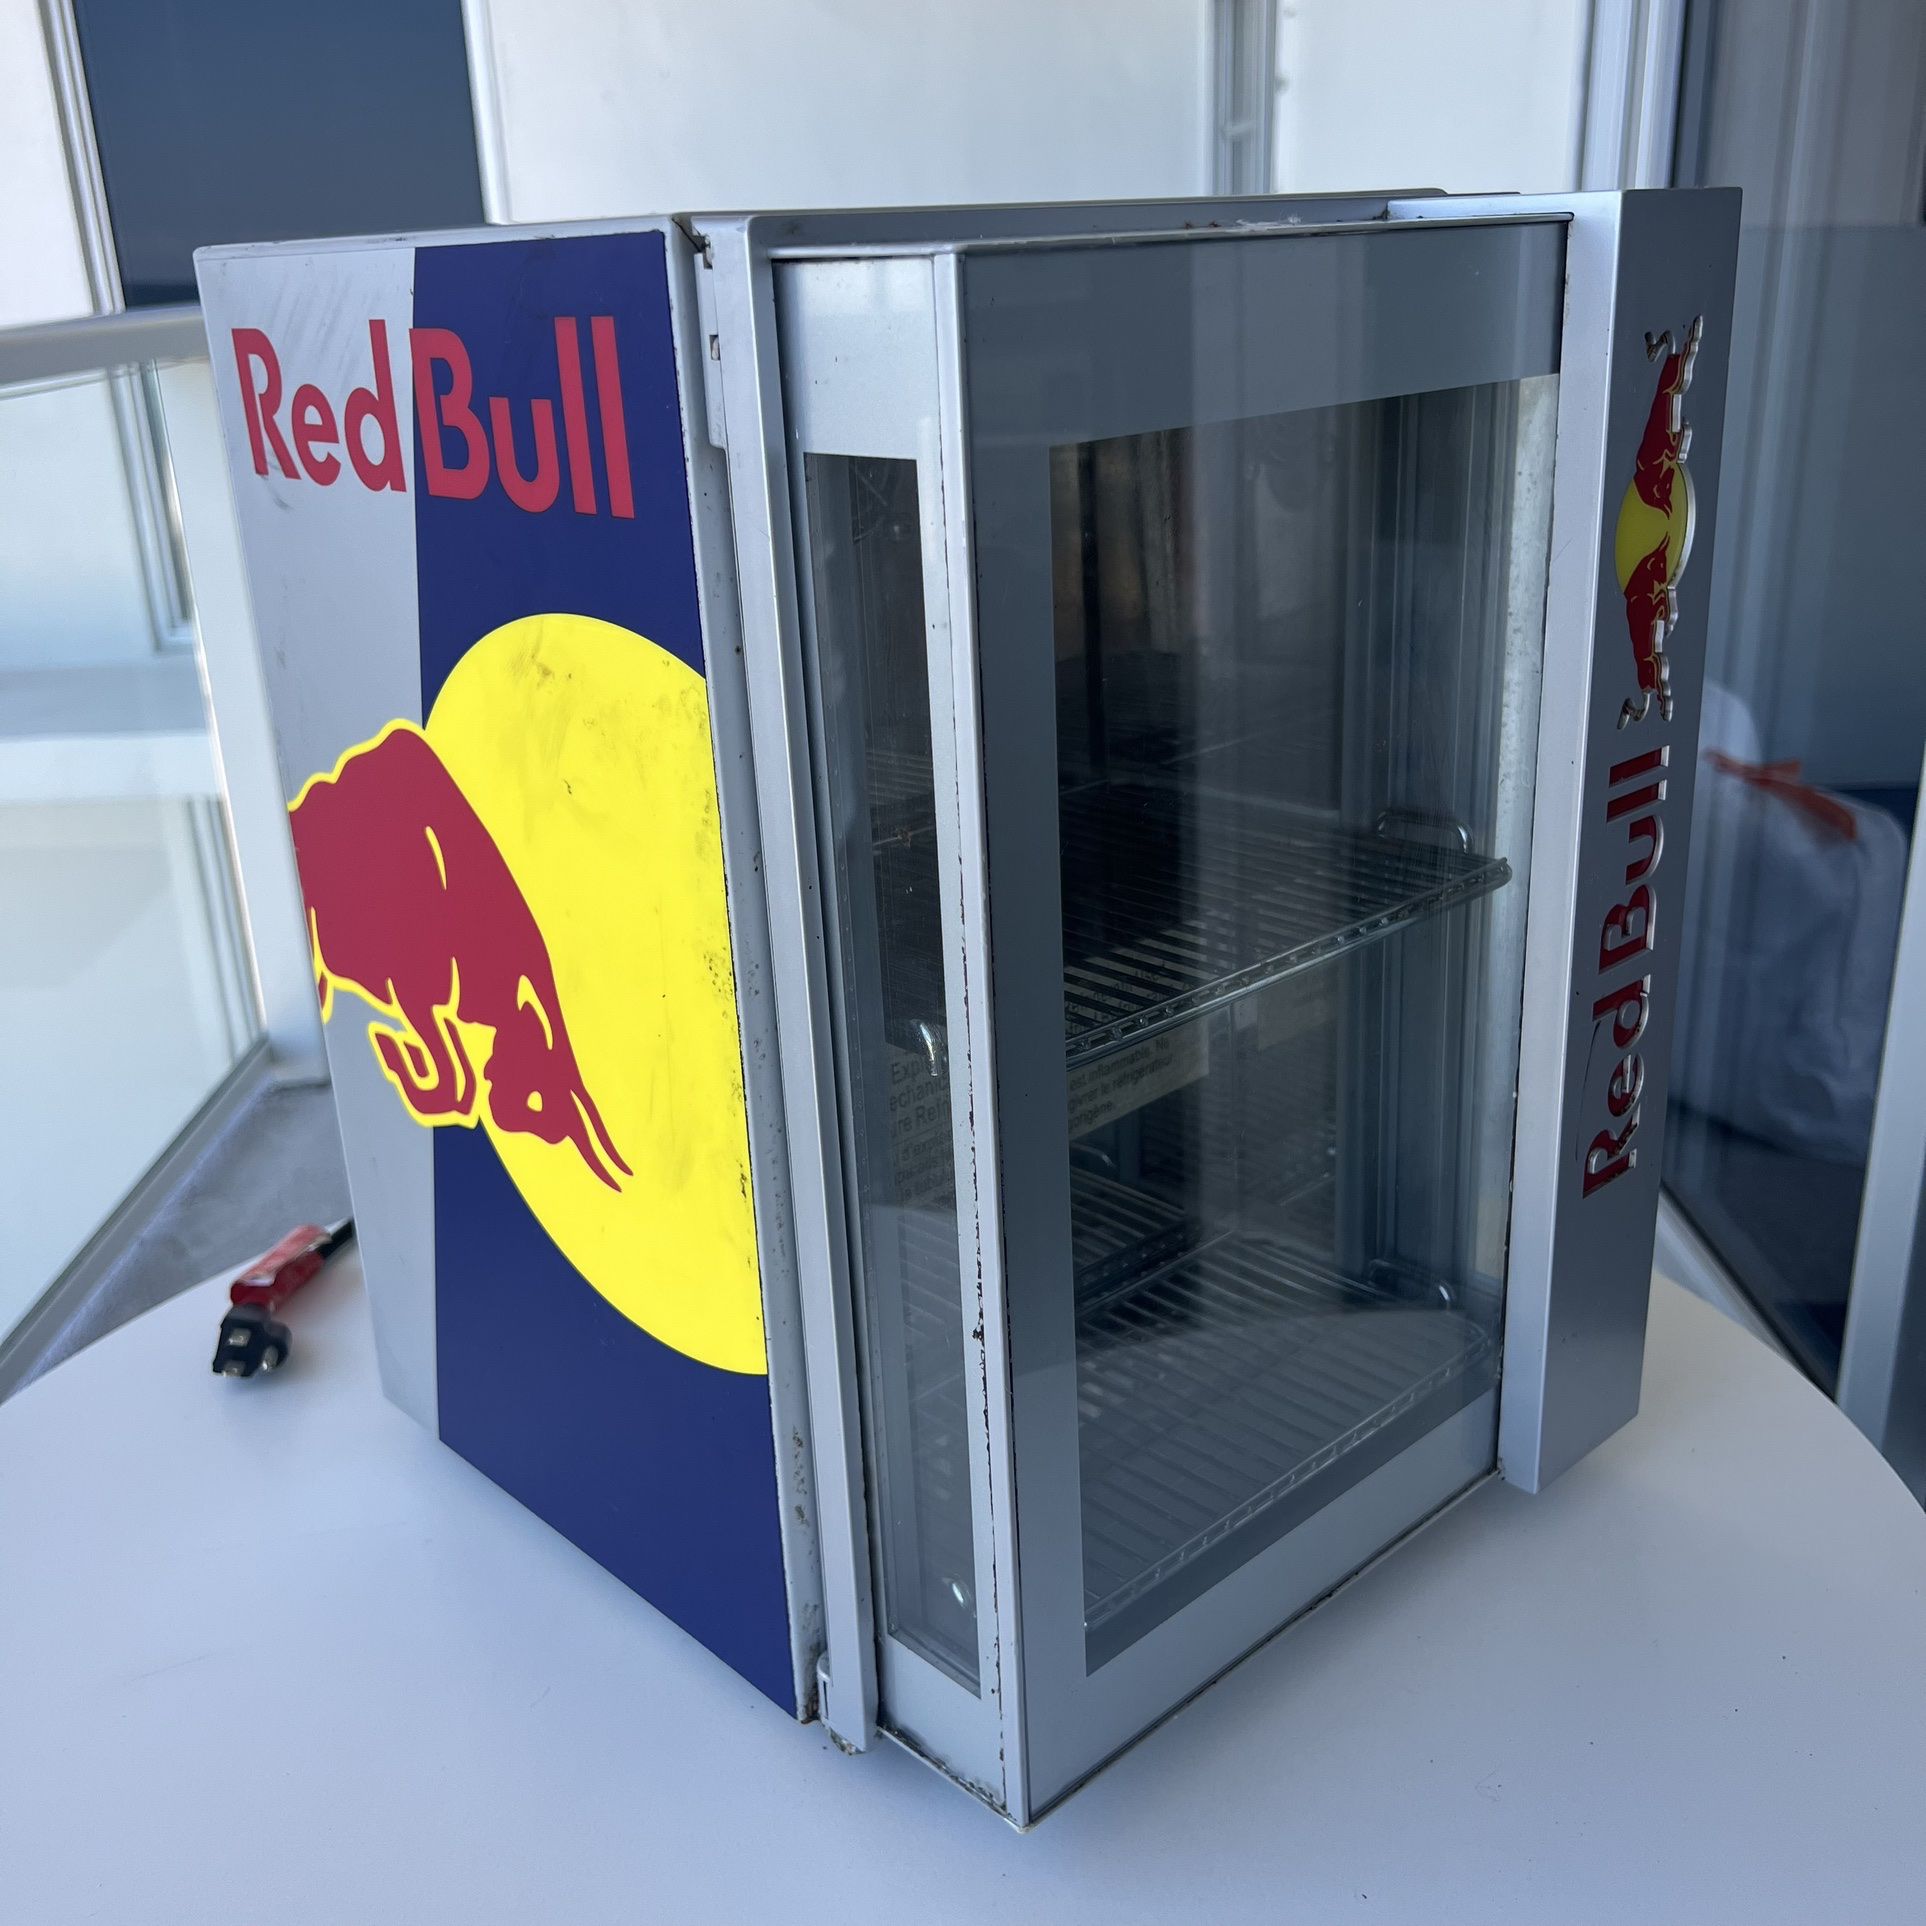 Baby Cooler Red Bull Fridge 2020 for Sale in Miami Beach, FL - OfferUp